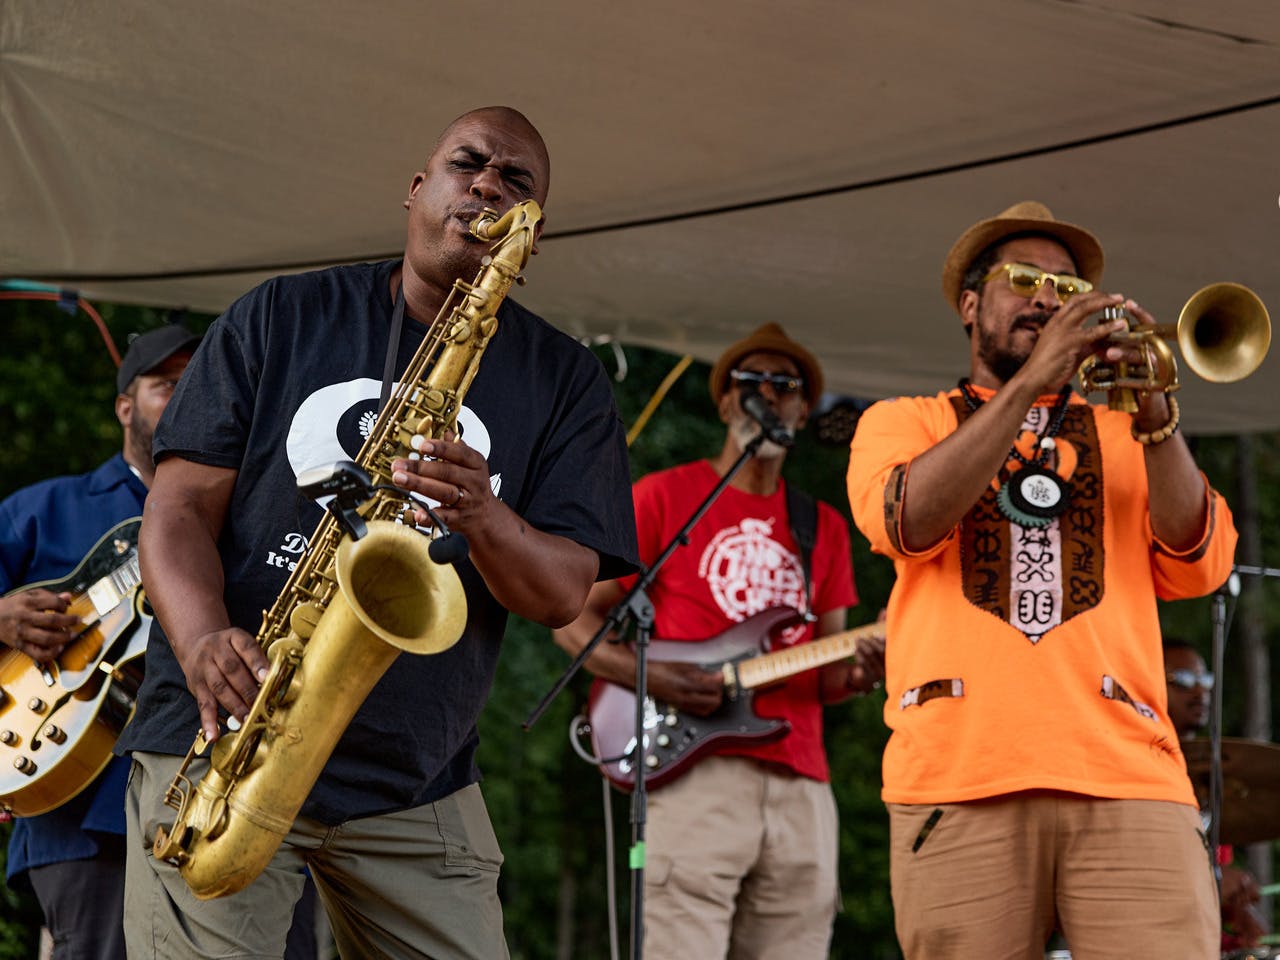 A band performs. In the front, one man plays a tenor saxophone next to a man playing the trumpet. Behind them, two men have guitars.